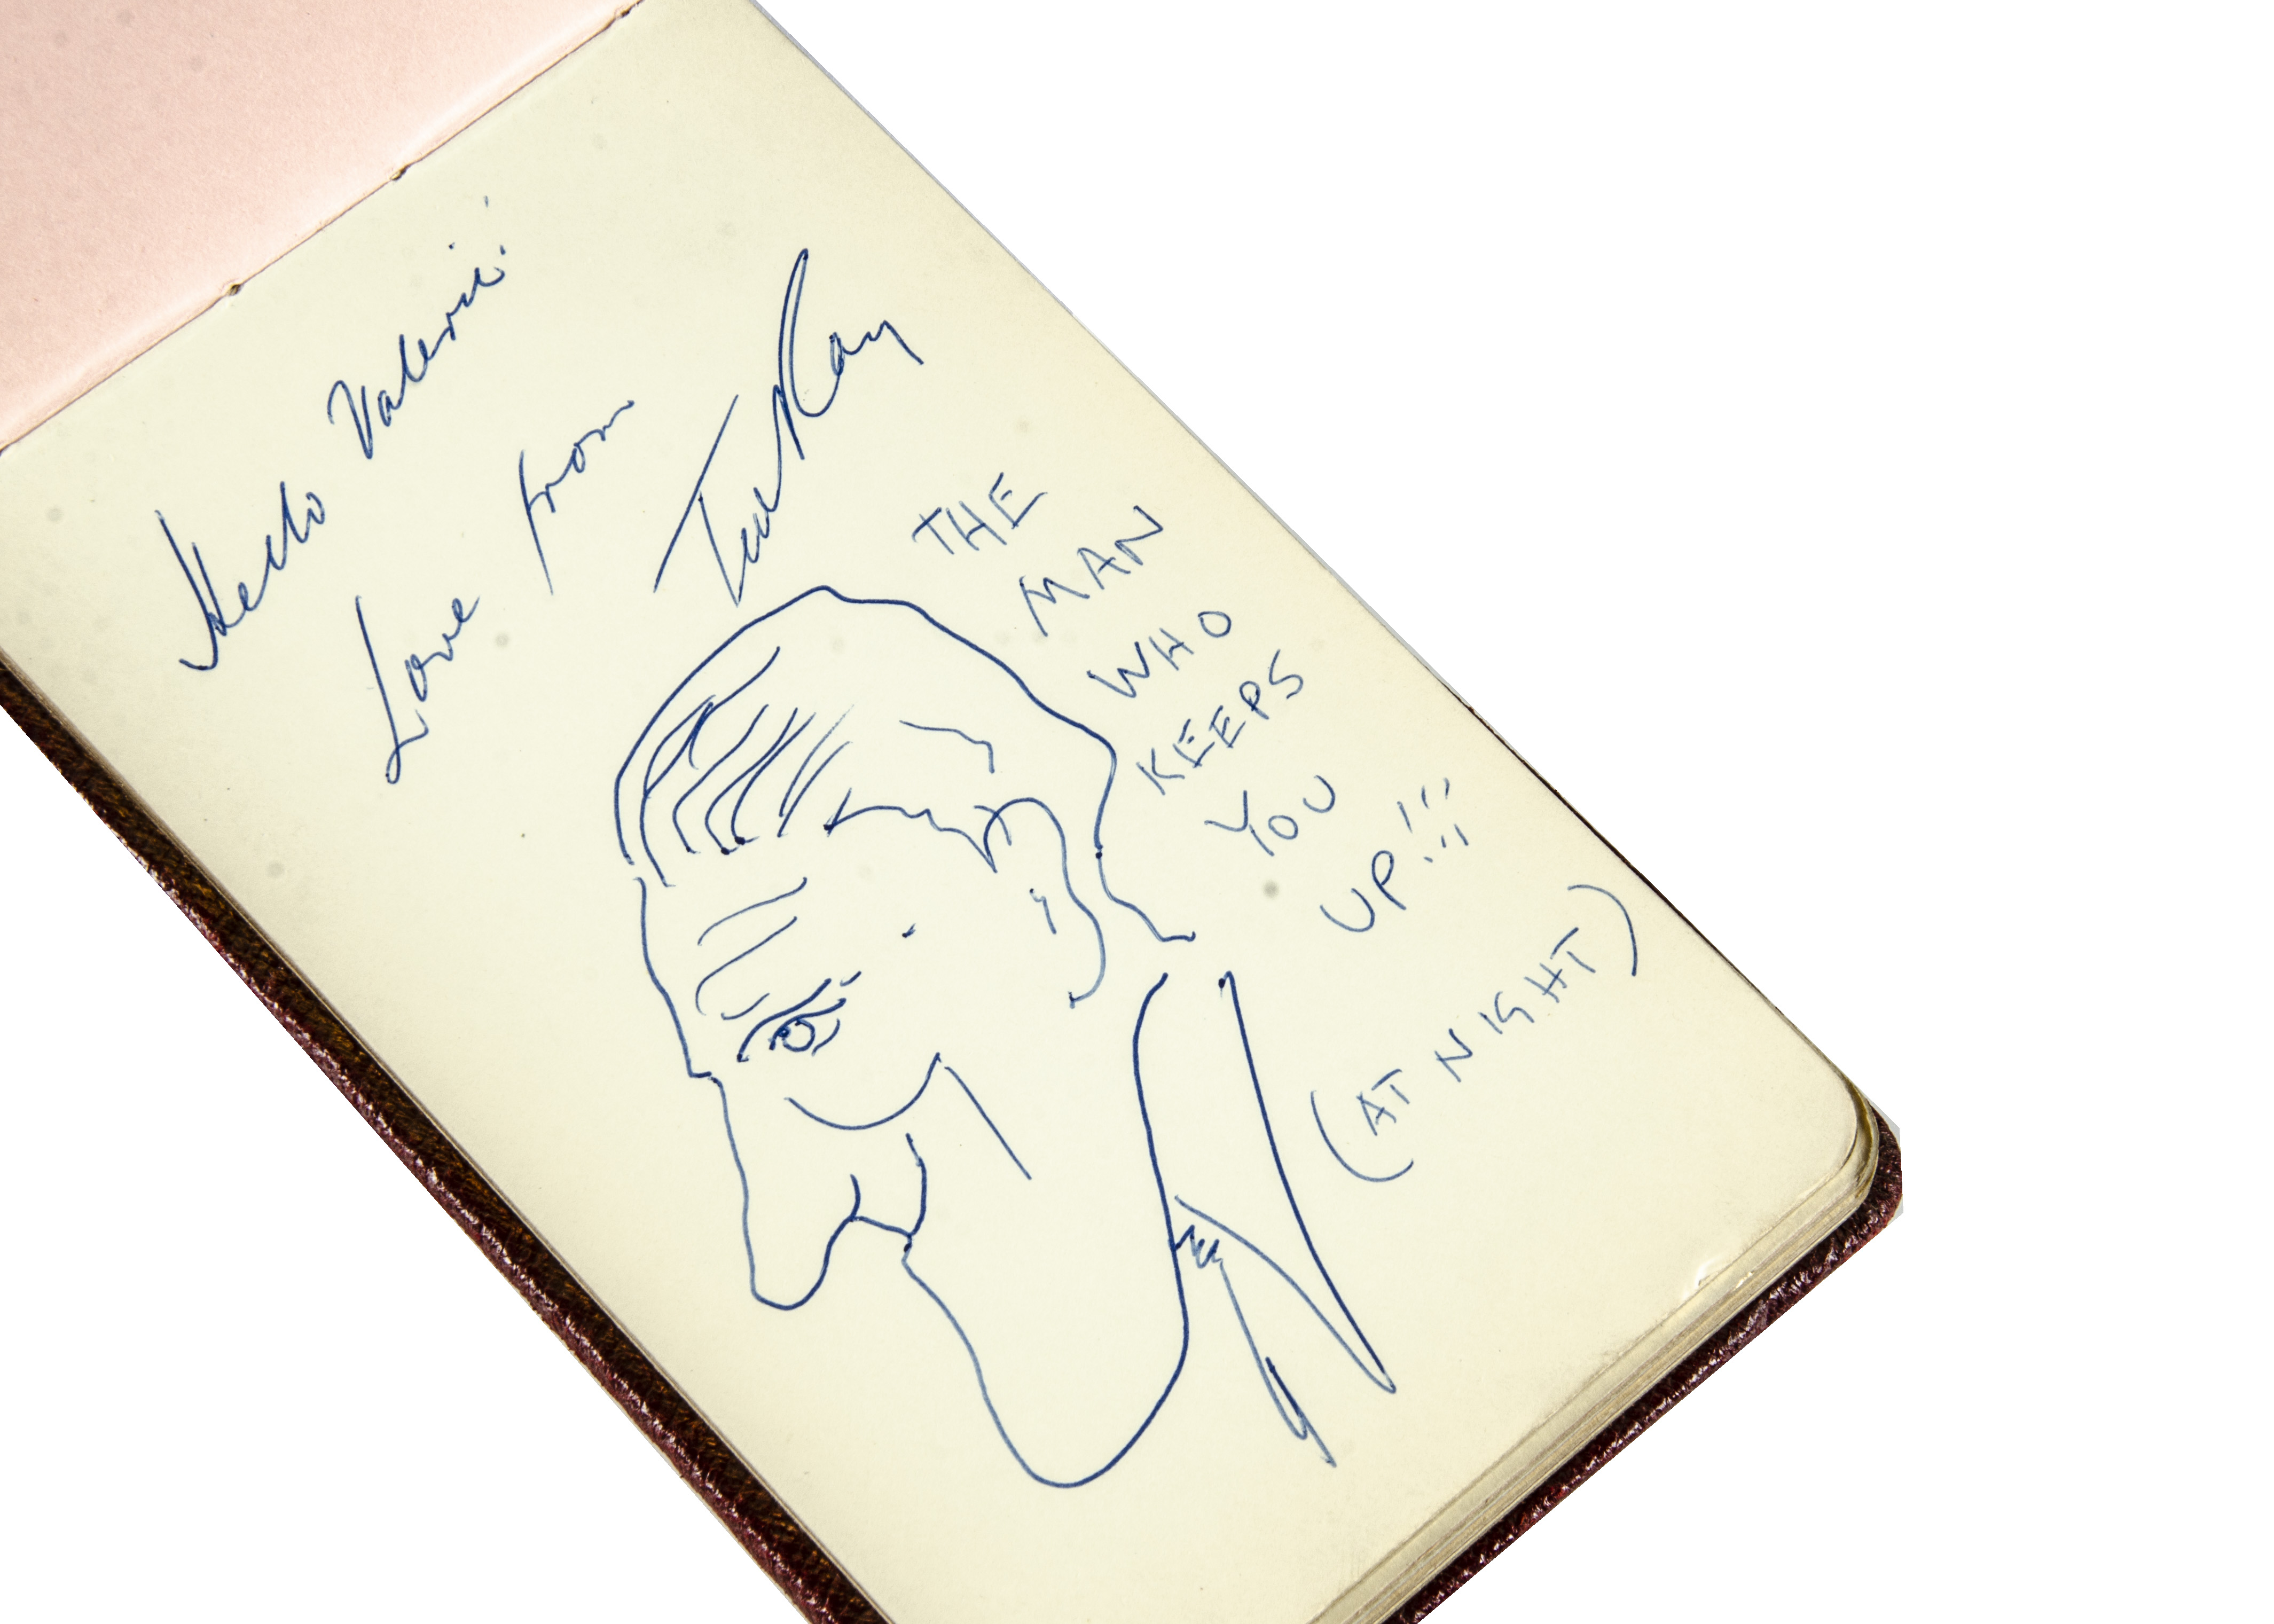 Autographs - Stage & Screen, an autograph album purchased at Christie's in 1979 that appears to - Image 4 of 5